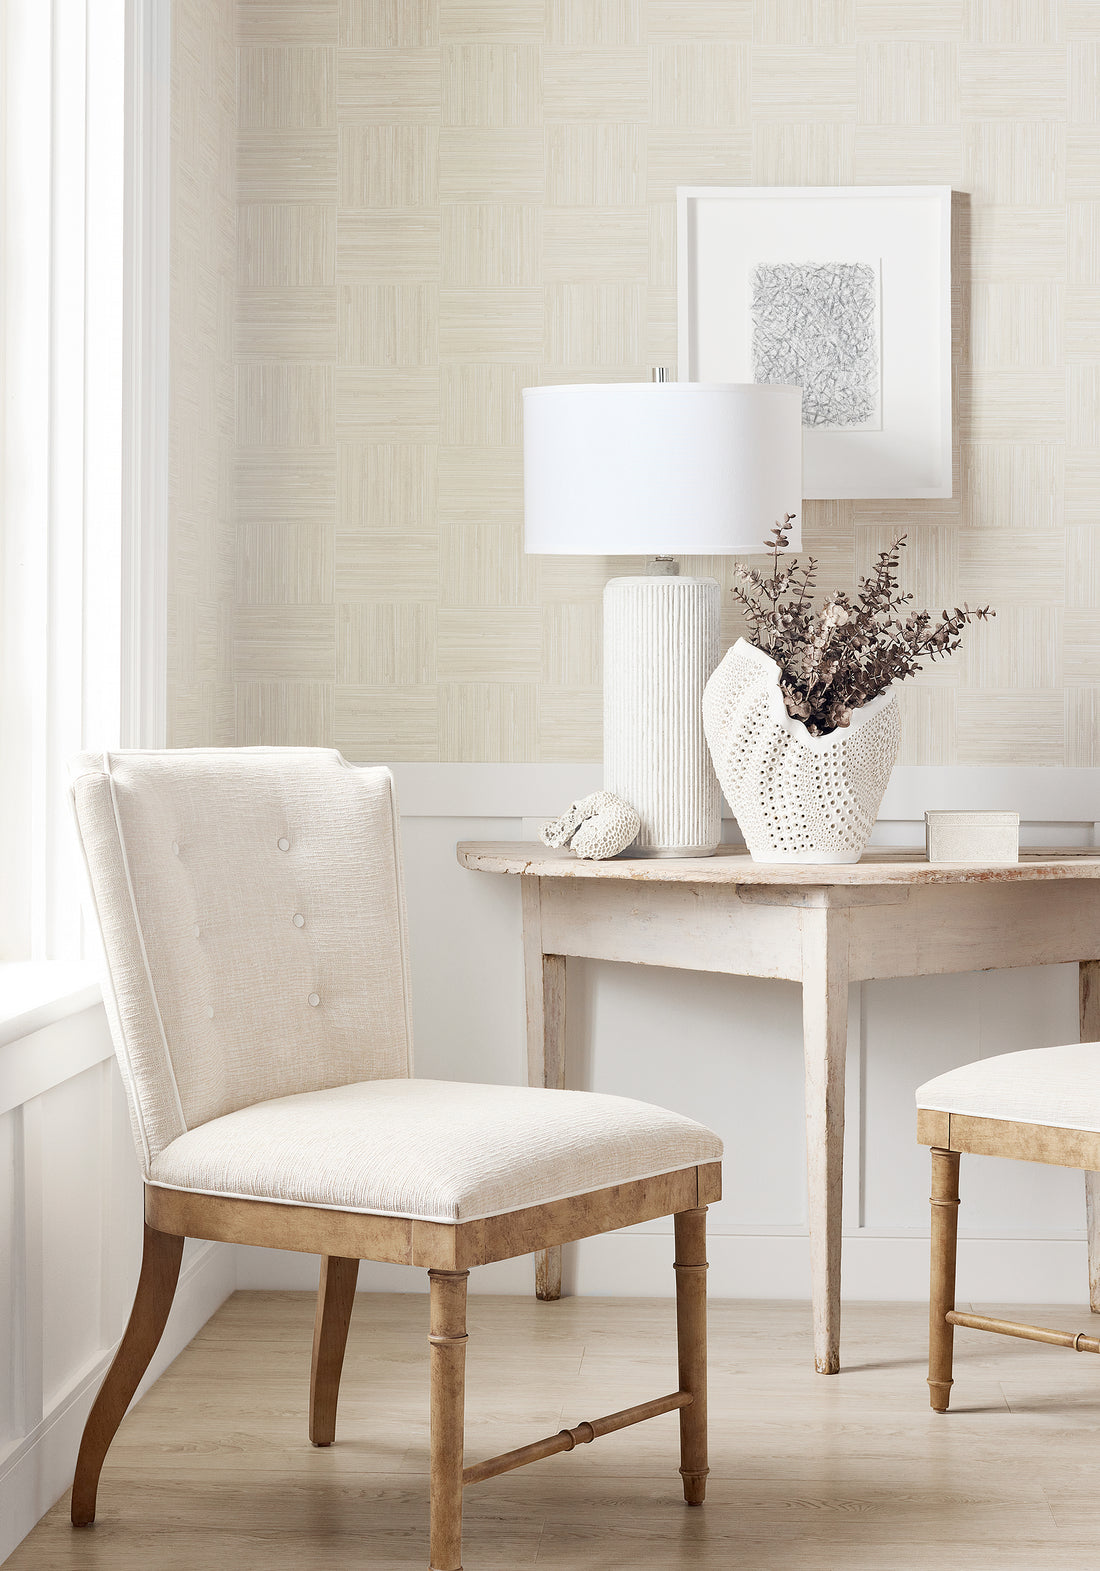 Stirling Dining Chairs in Piper woven fabric in ivory color - pattern number W73439 by Thibaut in the Landmark Textures collection